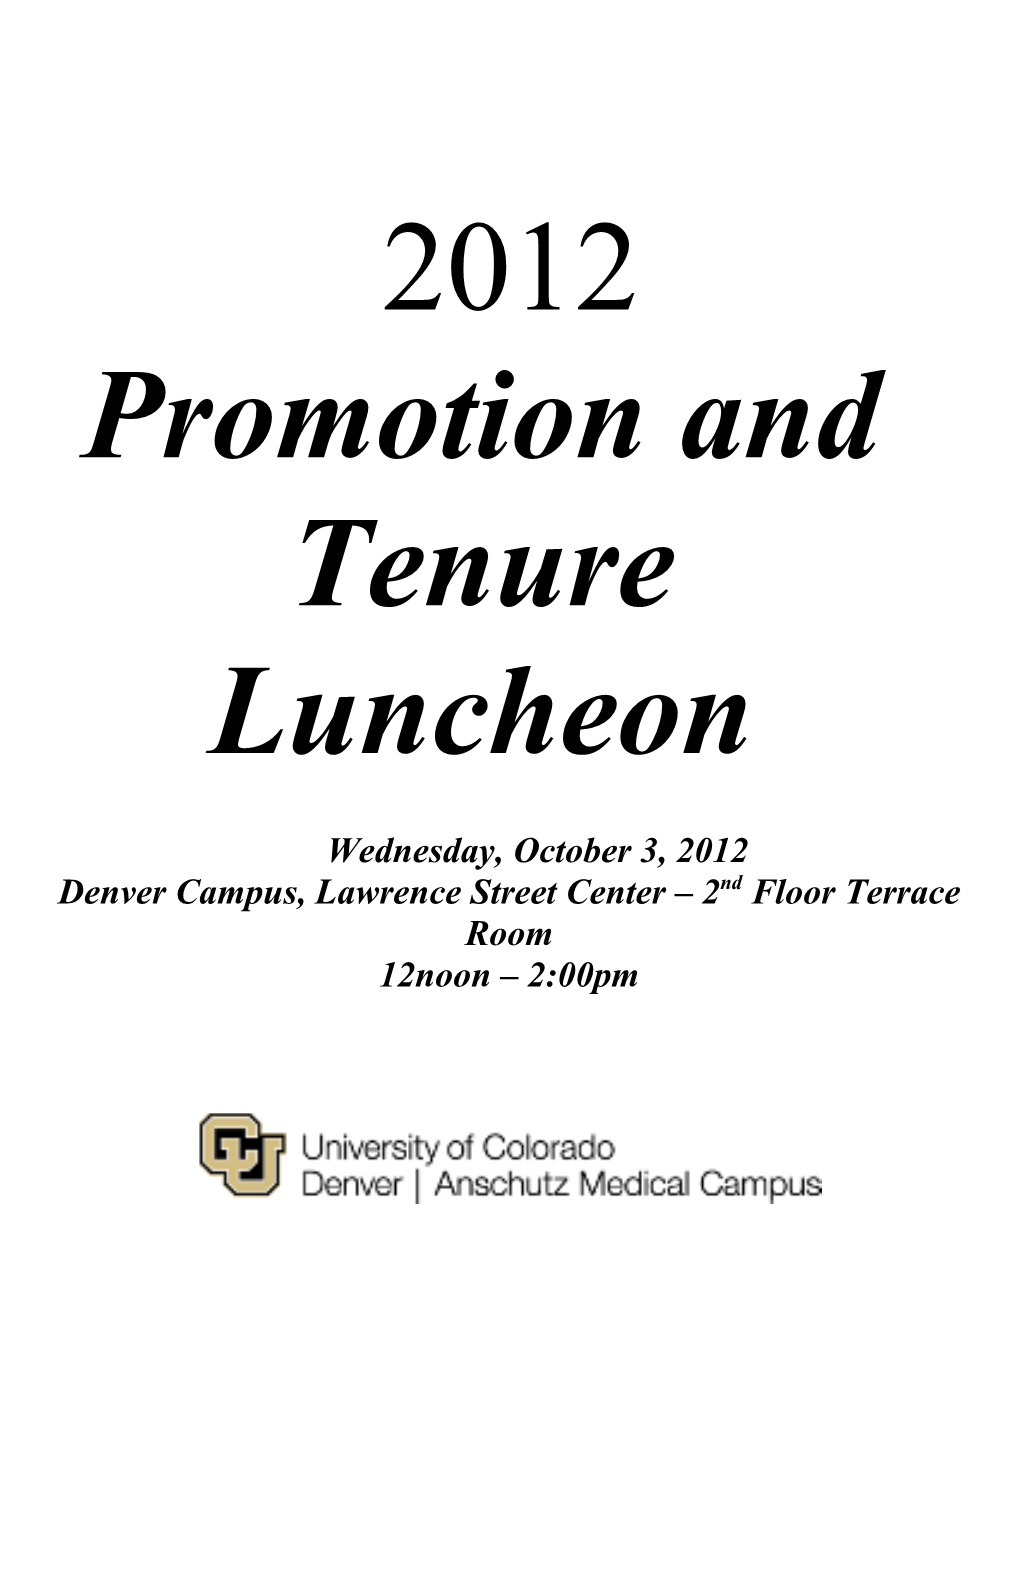 Promotion and Tenure Luncheon